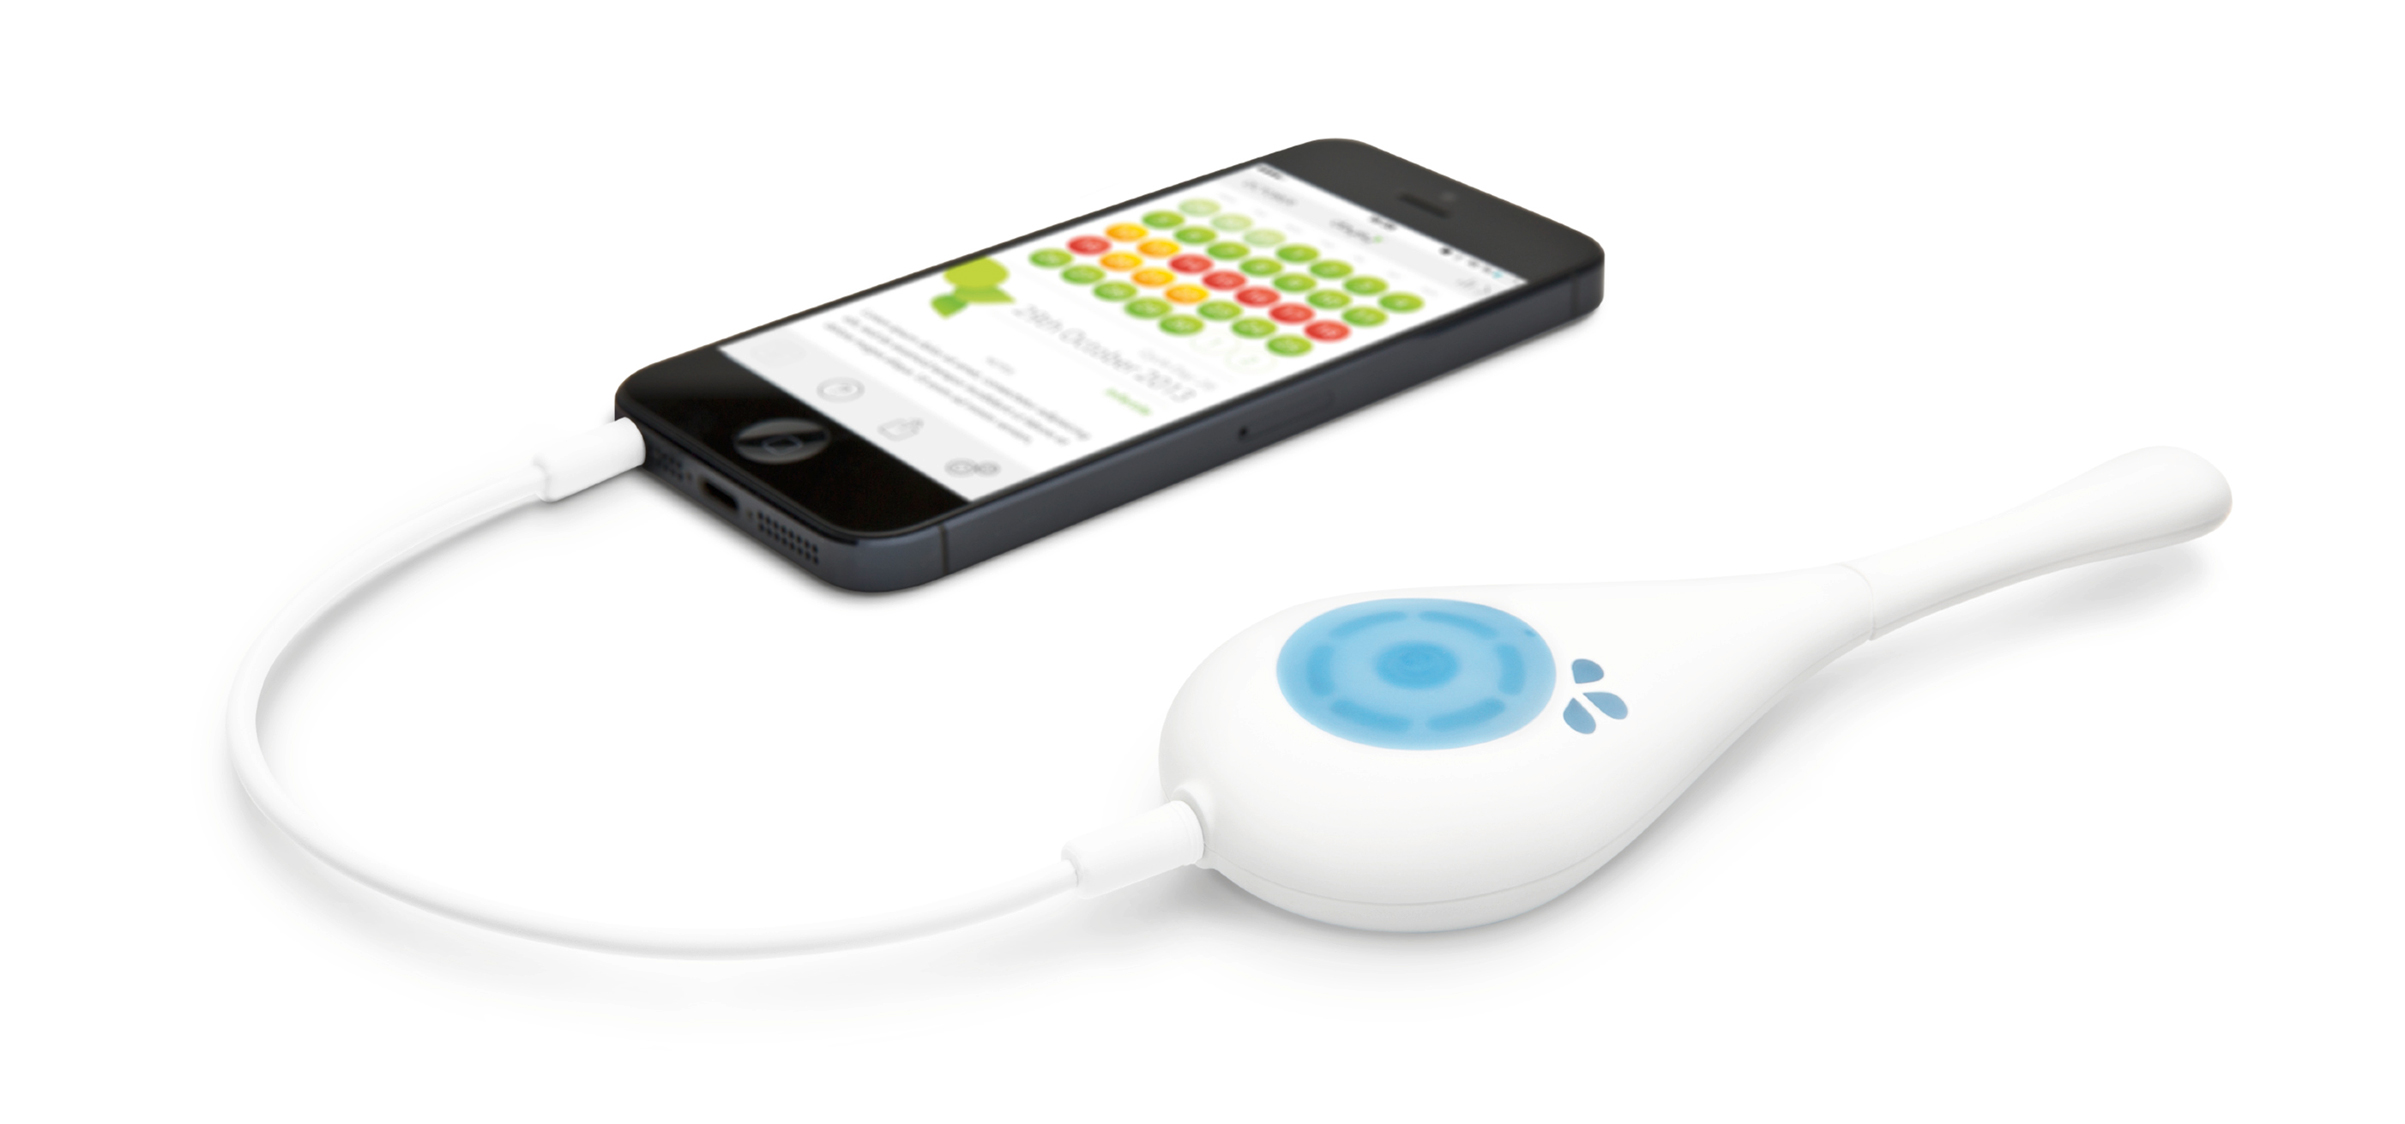 Daysy, a thermometer and app product that claims to be 99.4% effective at telling women if they are fertile or not. (Daysy)